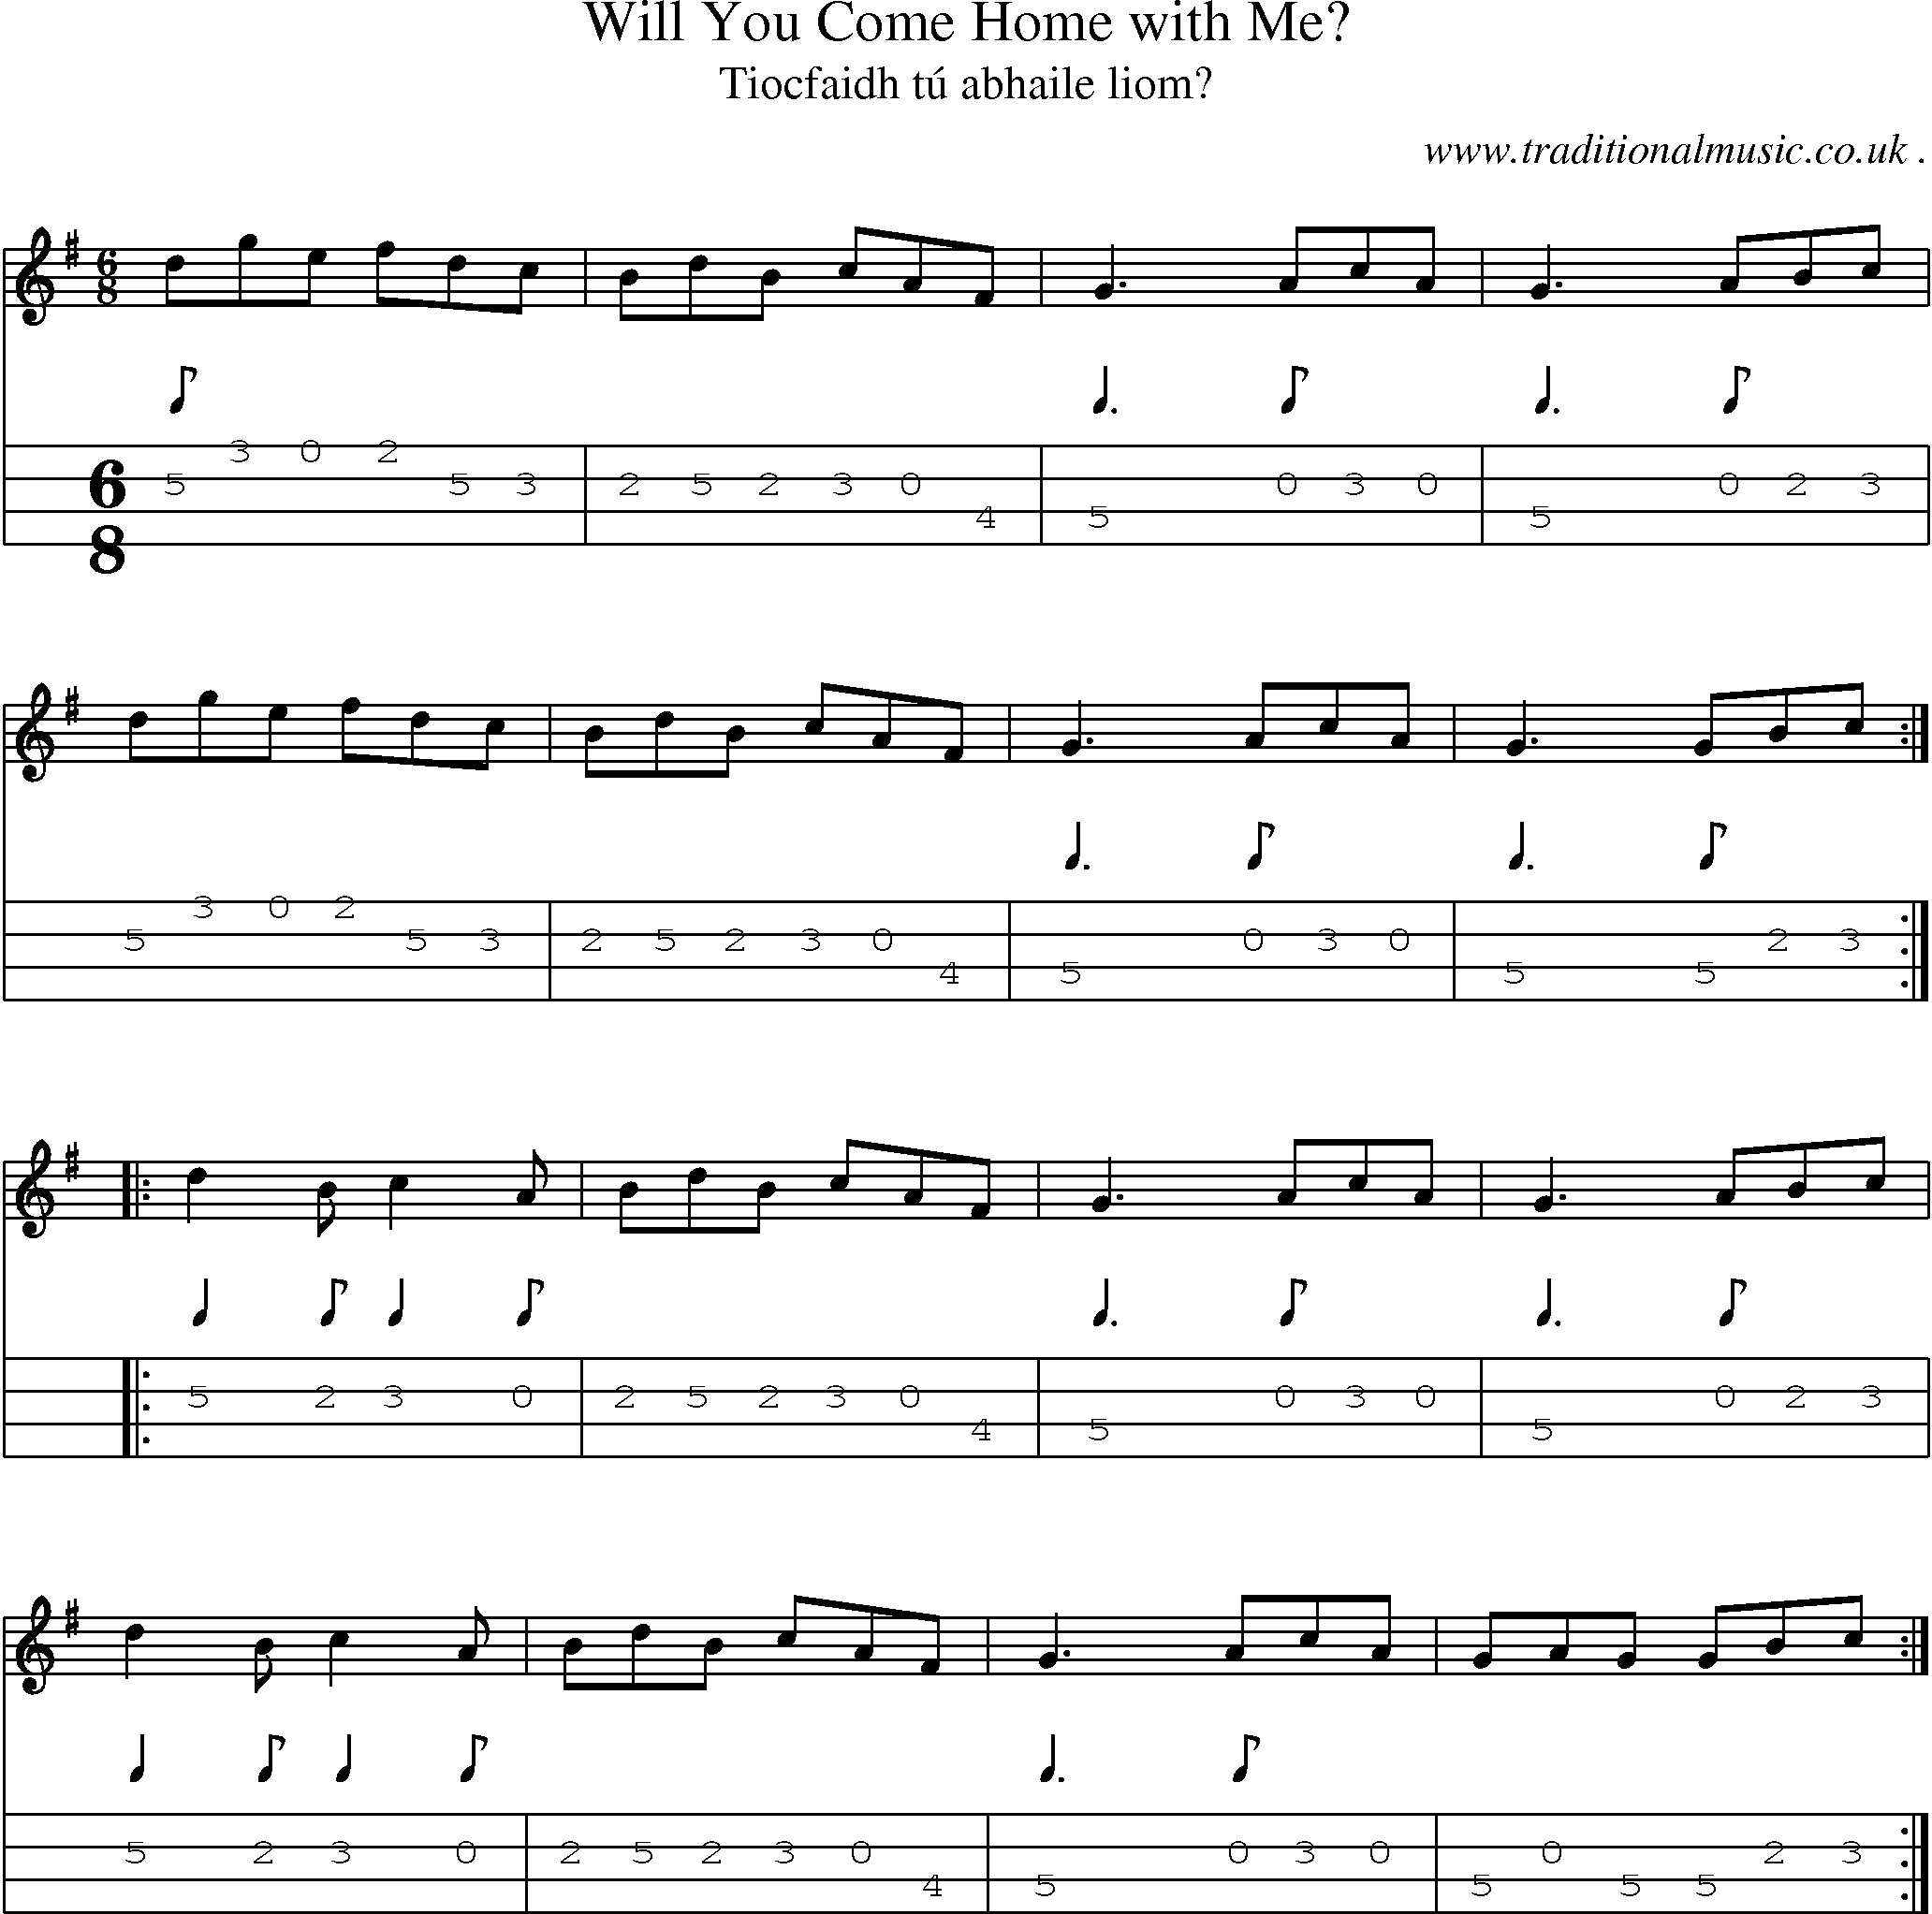 Sheet-Music and Mandolin Tabs for Will You Come Home With Me